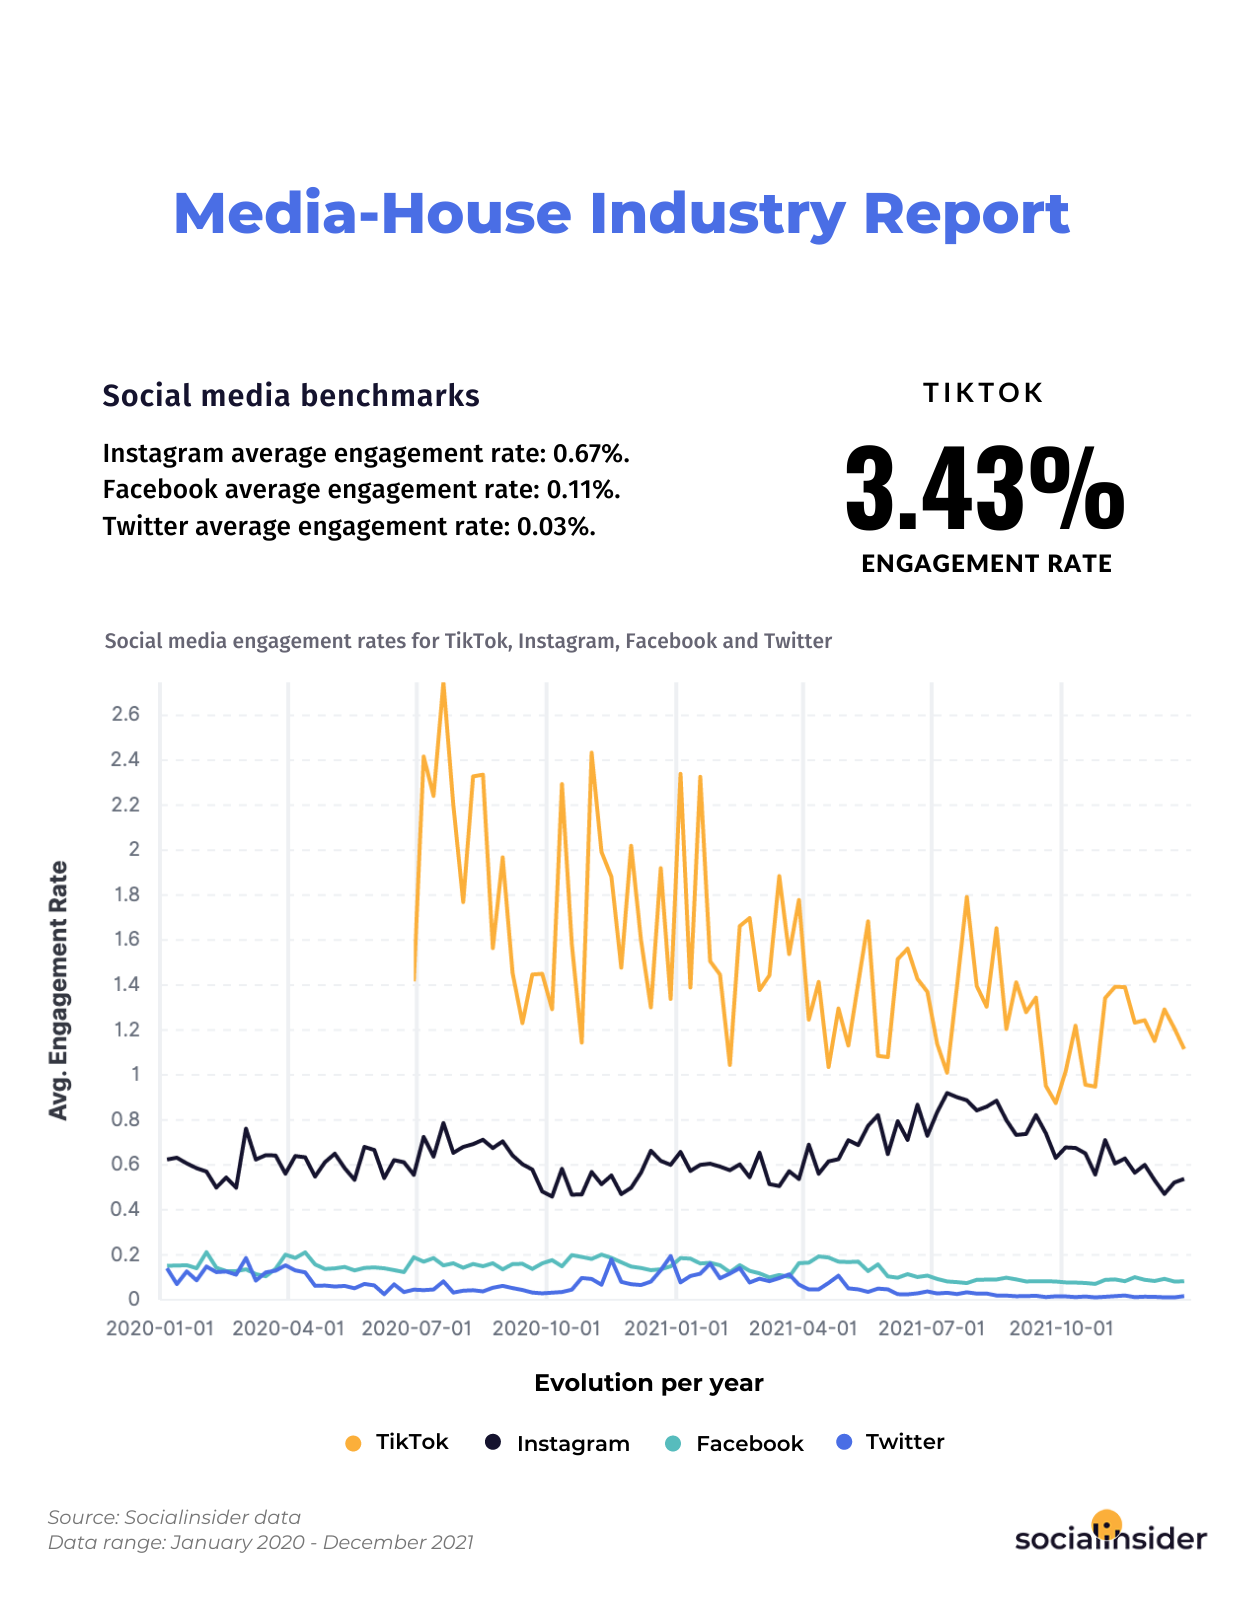 Engagement rate stats for the media-house industry for 2022